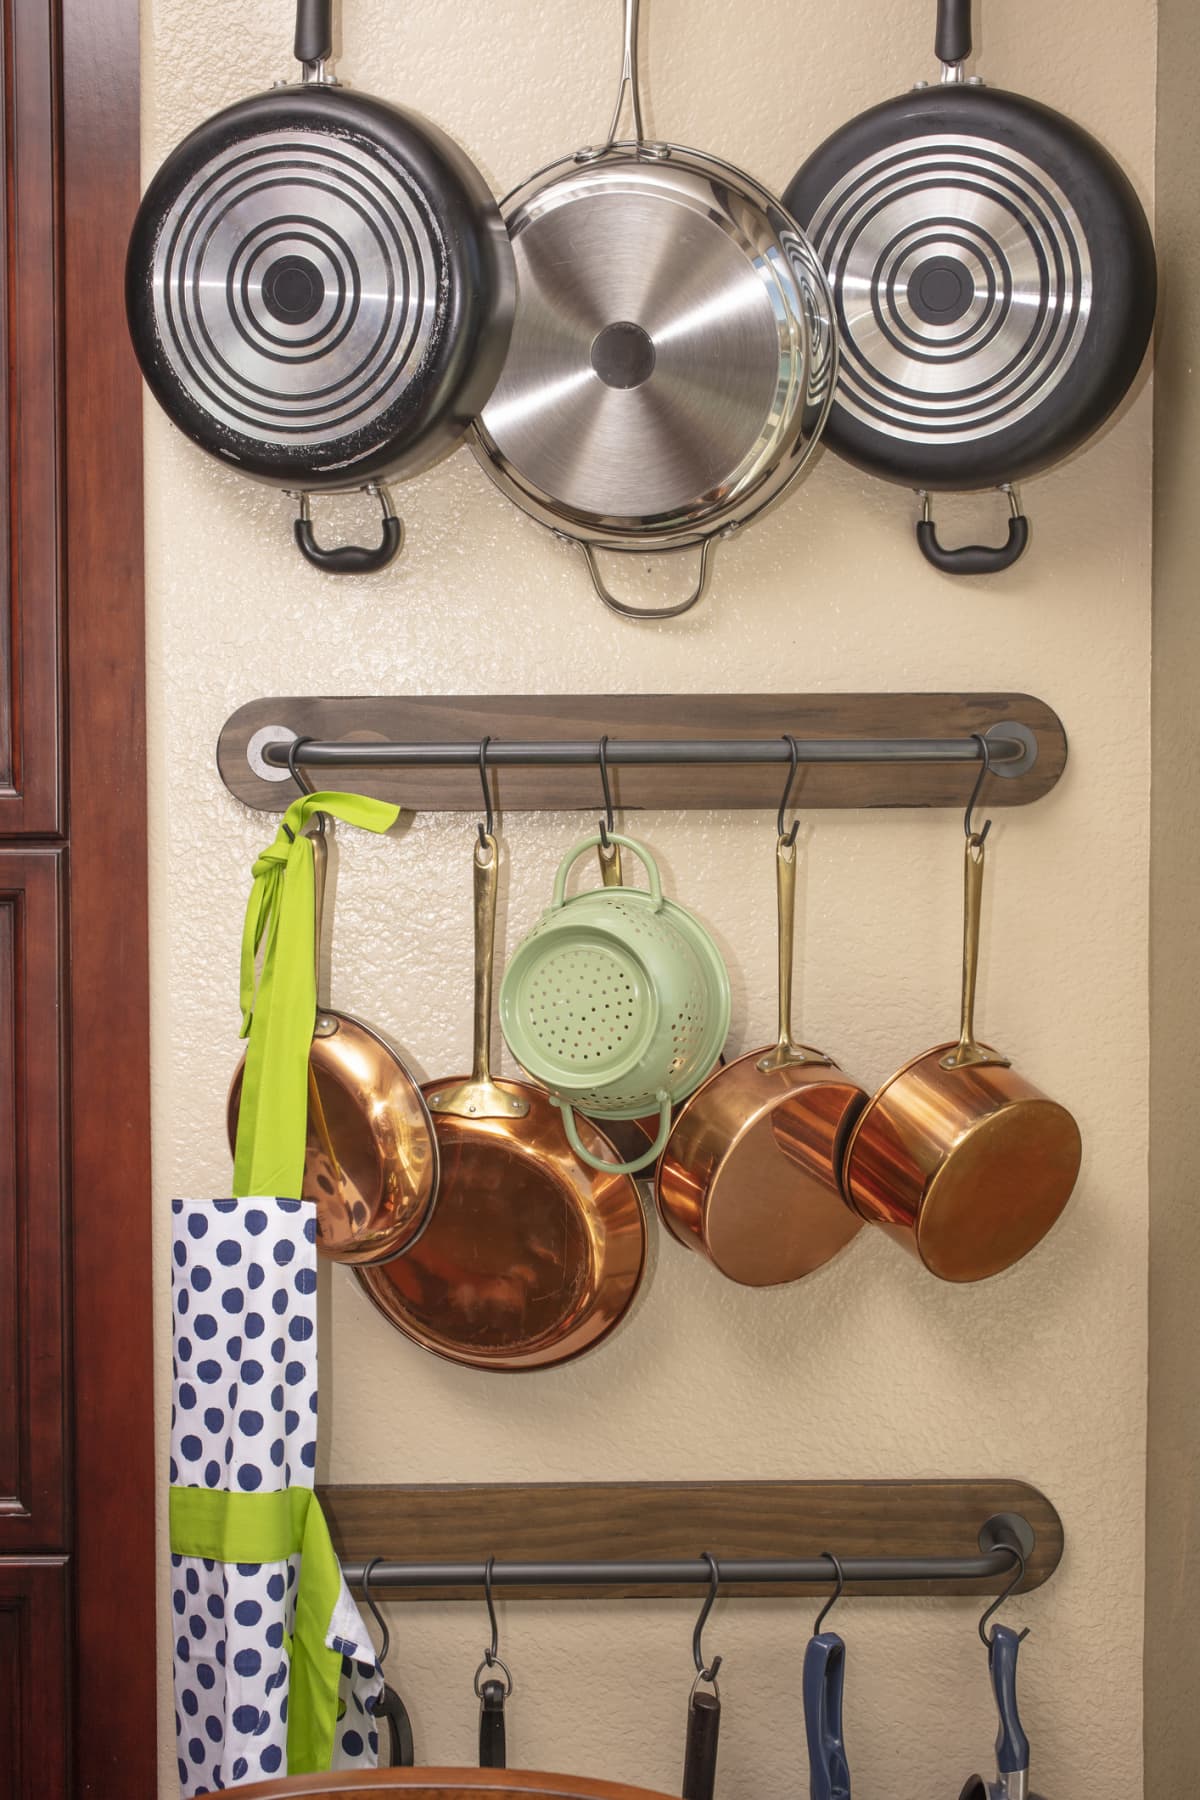 Pots and pans hanging on a kitchen wall to save space